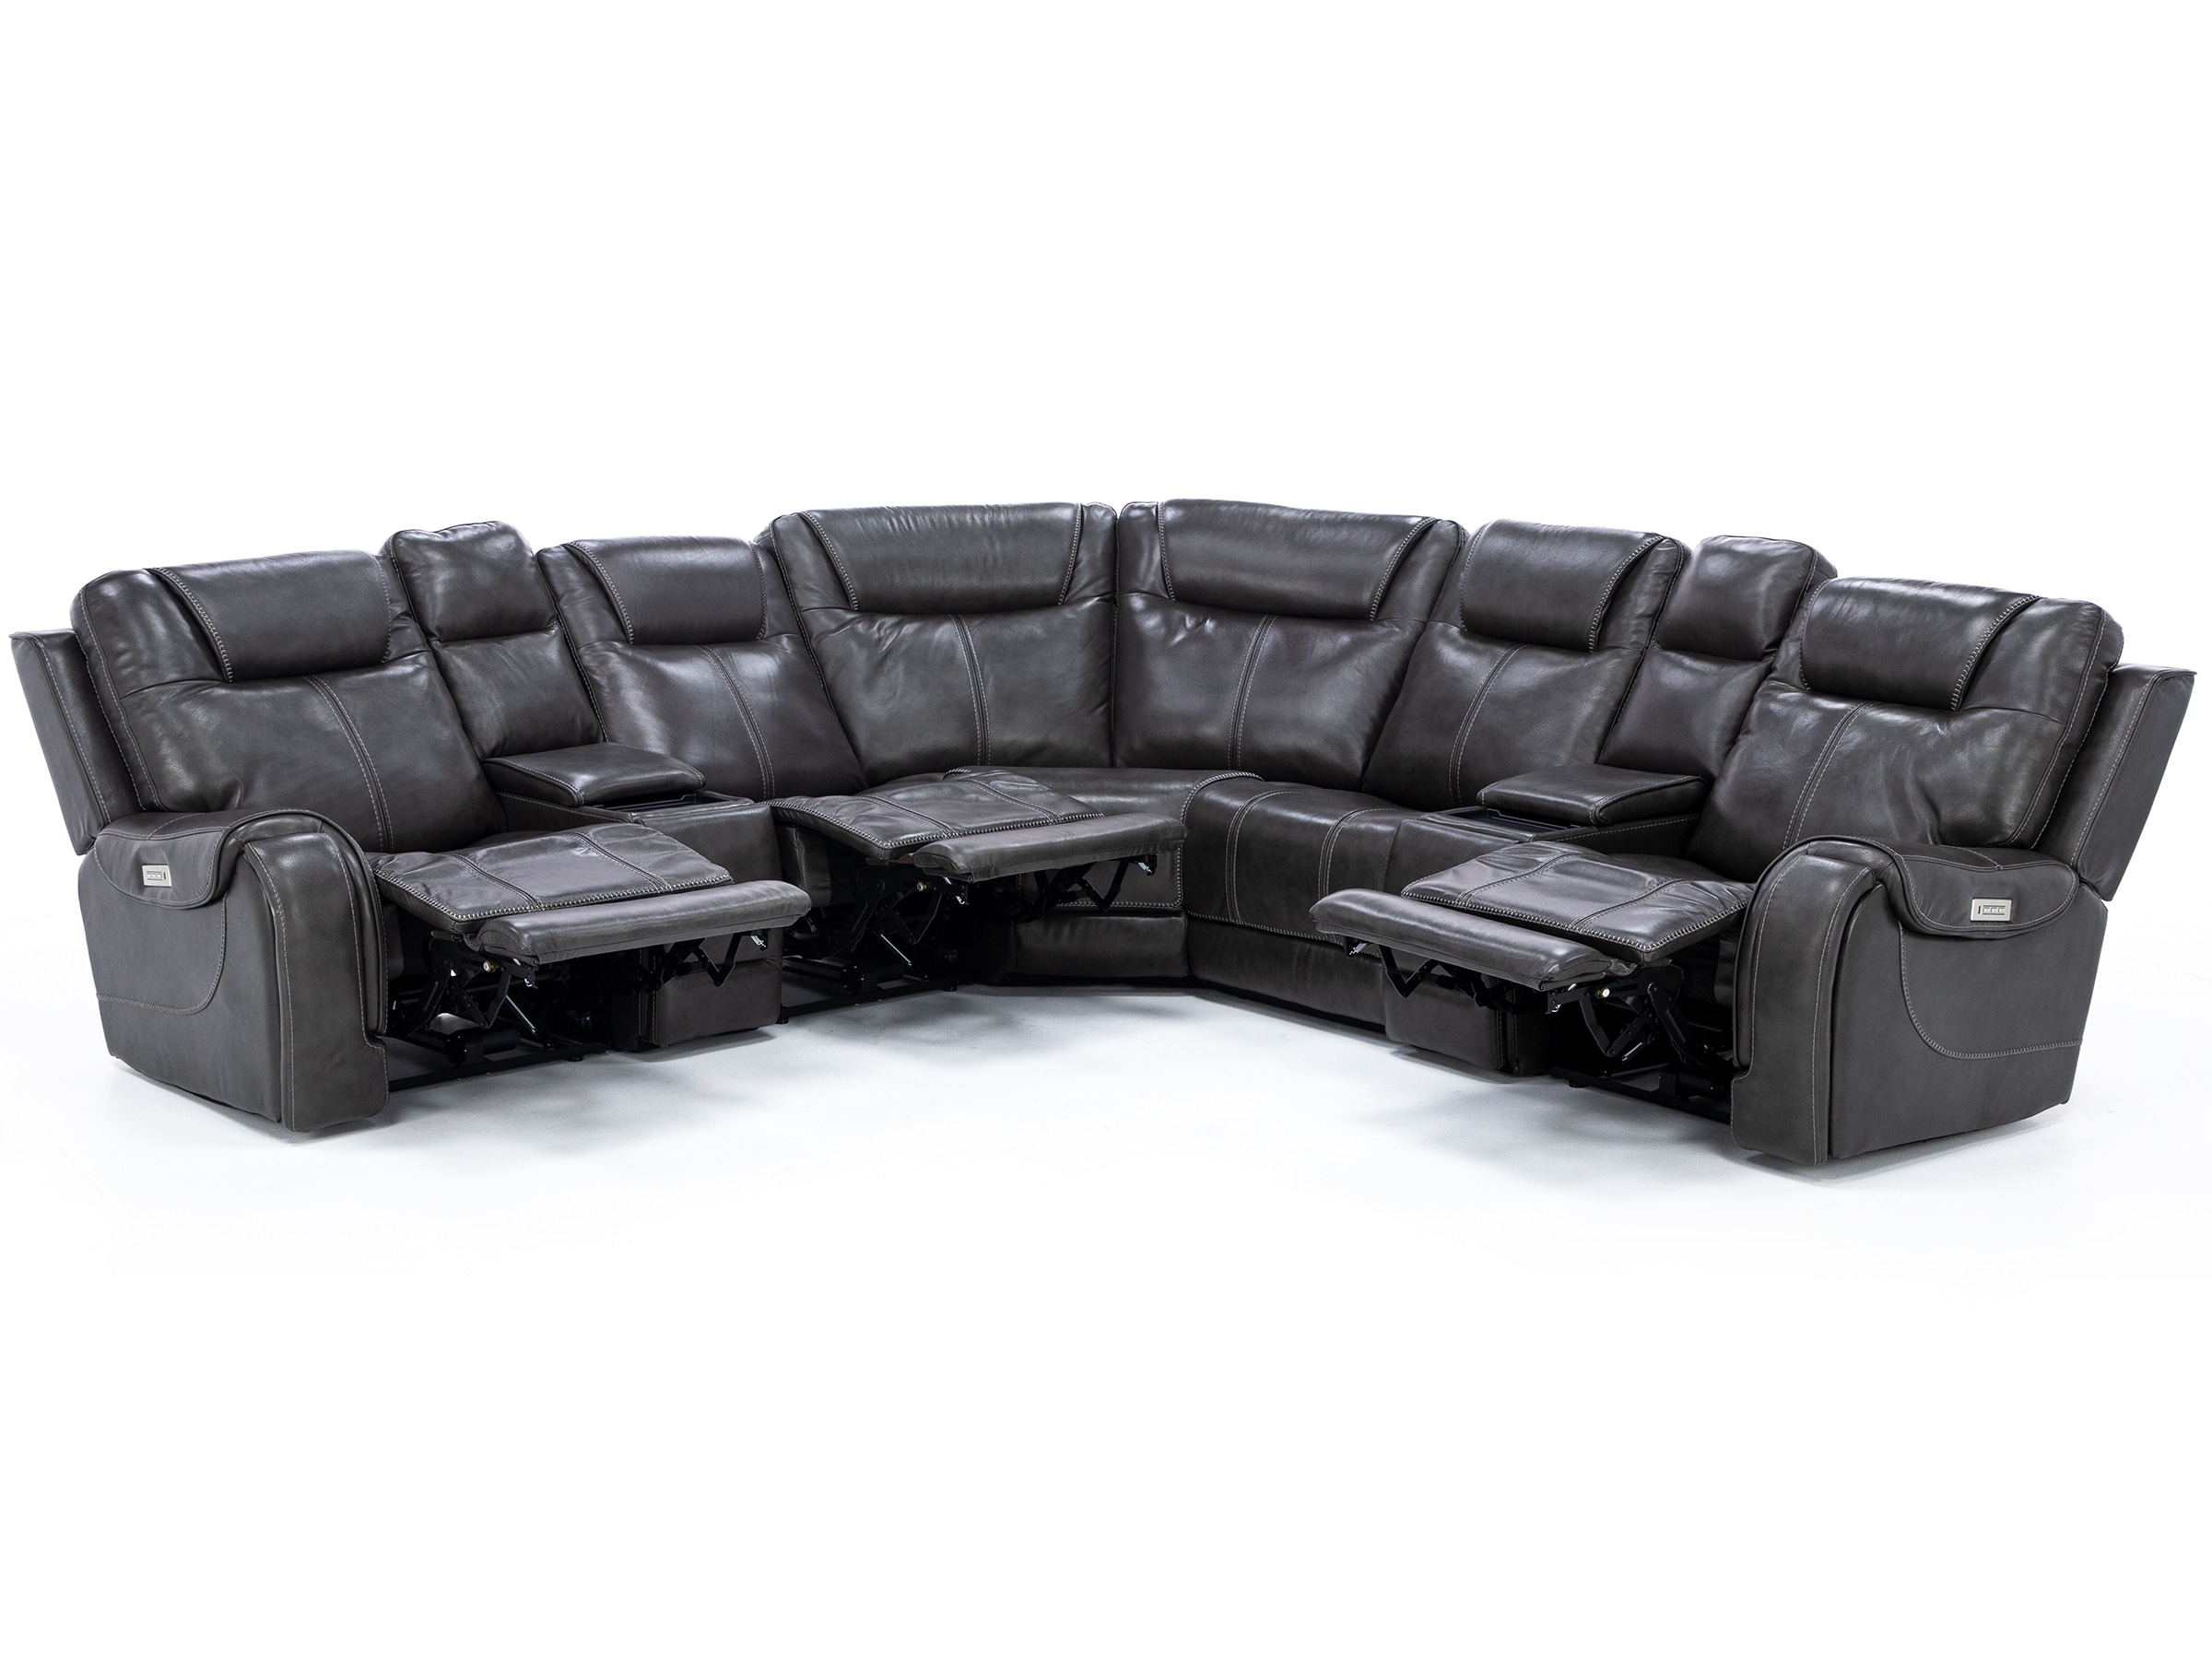 Fully Loaded Reclining Zion Steinhafels Leather | 7-Pc. Modular